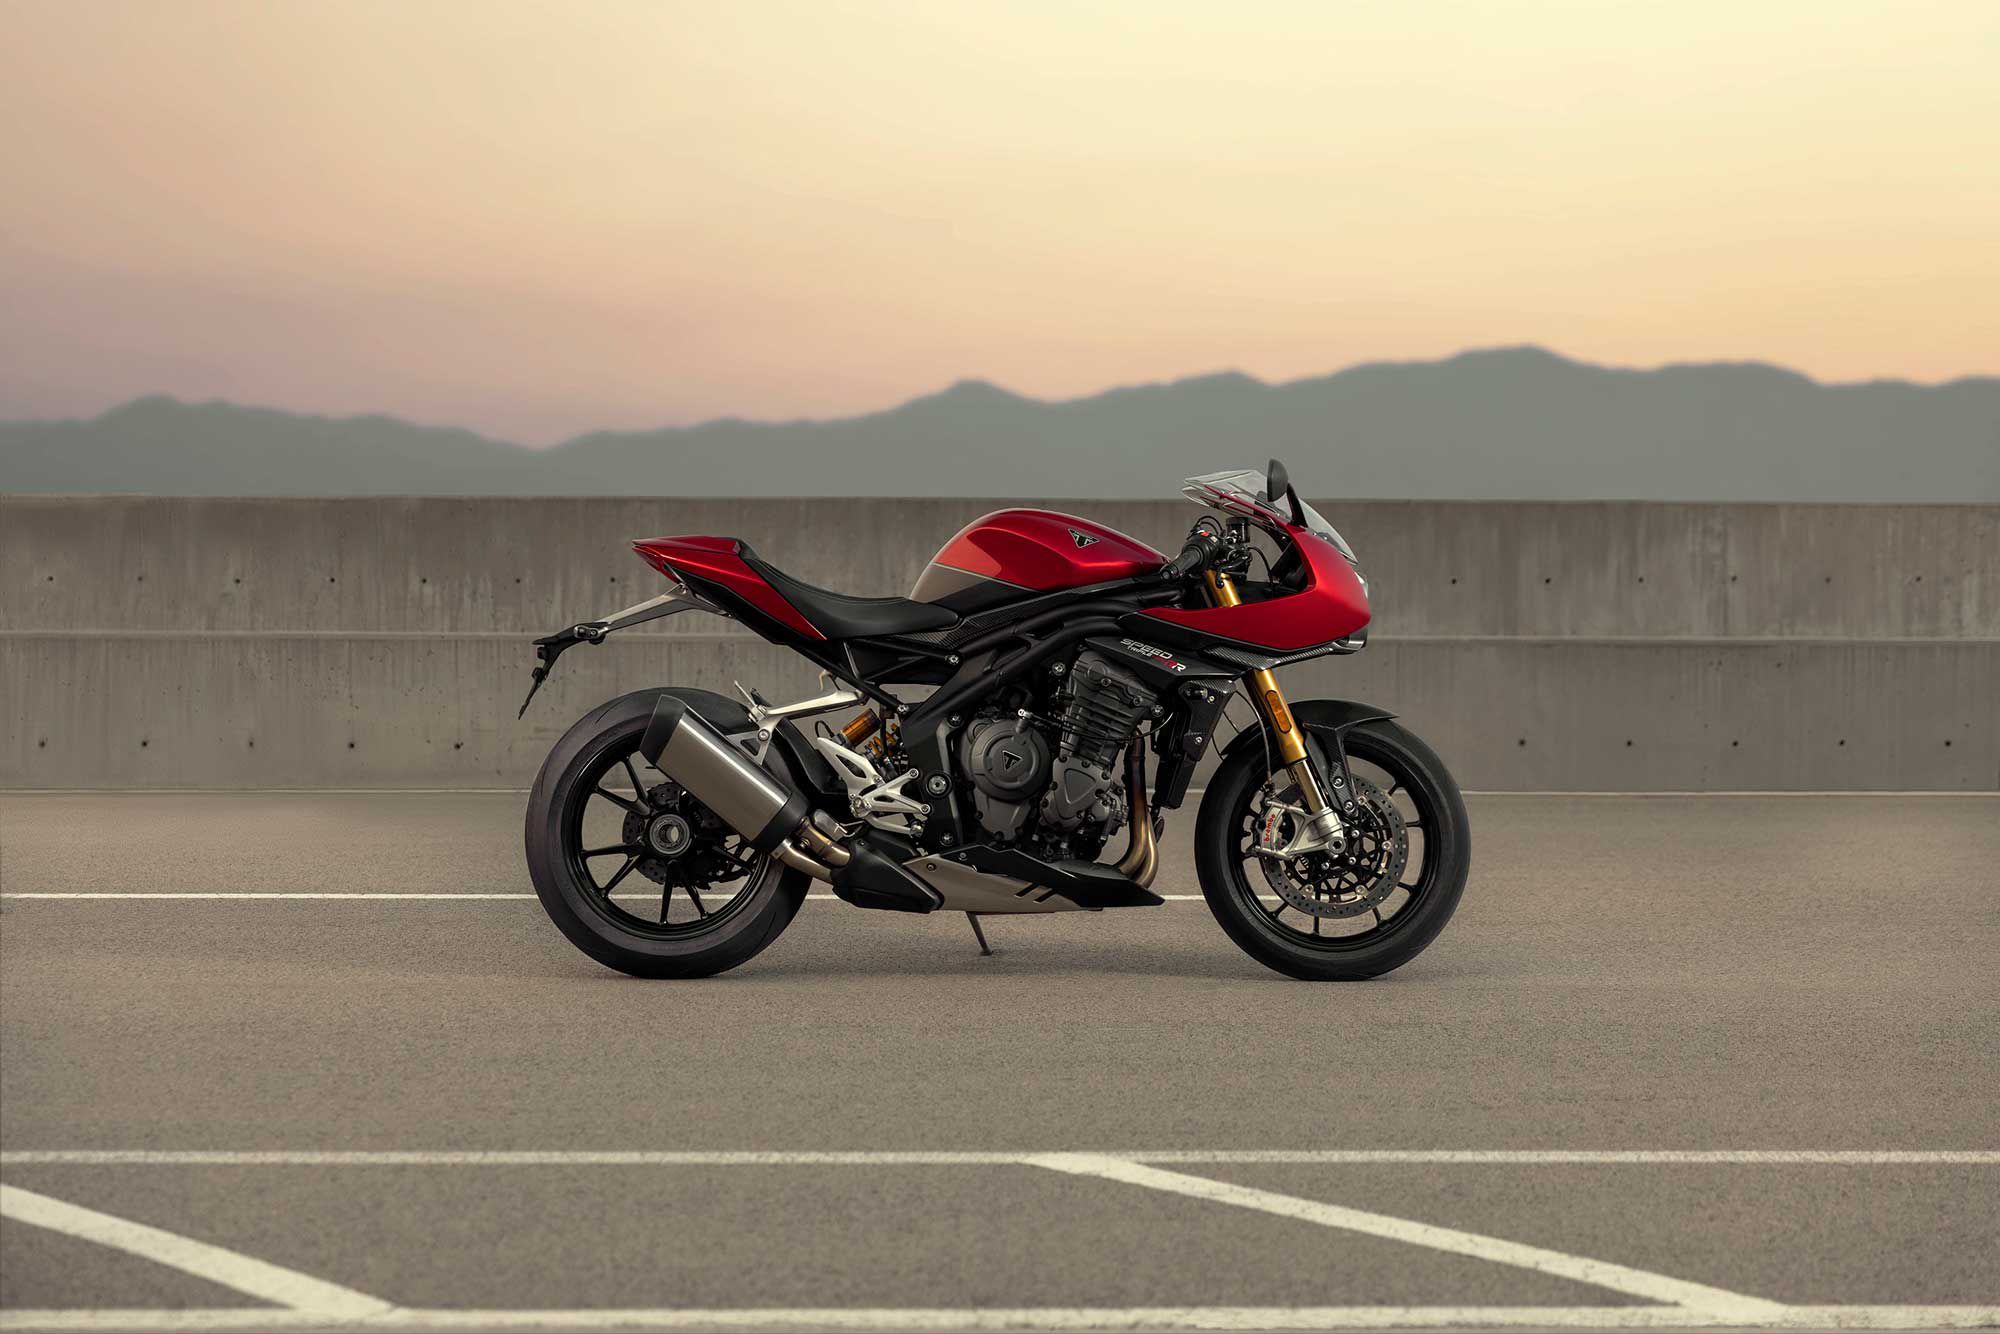 Triumph blends nods to cafe styling with an aggressive, sportbike stance.